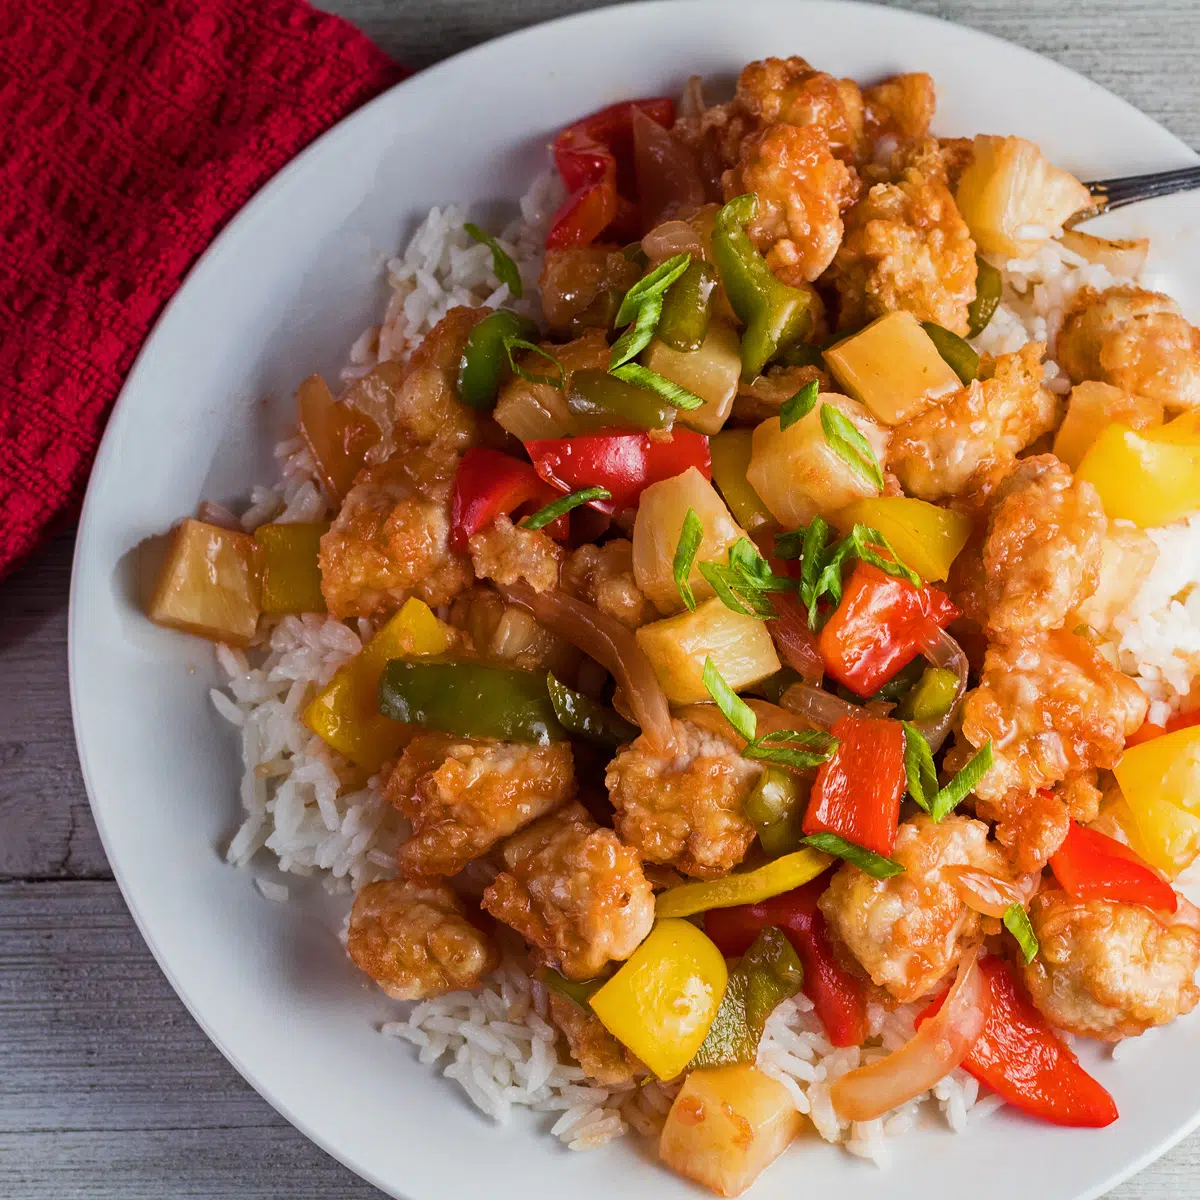 Delightfully tangy sweet and sour pork served on white plate.